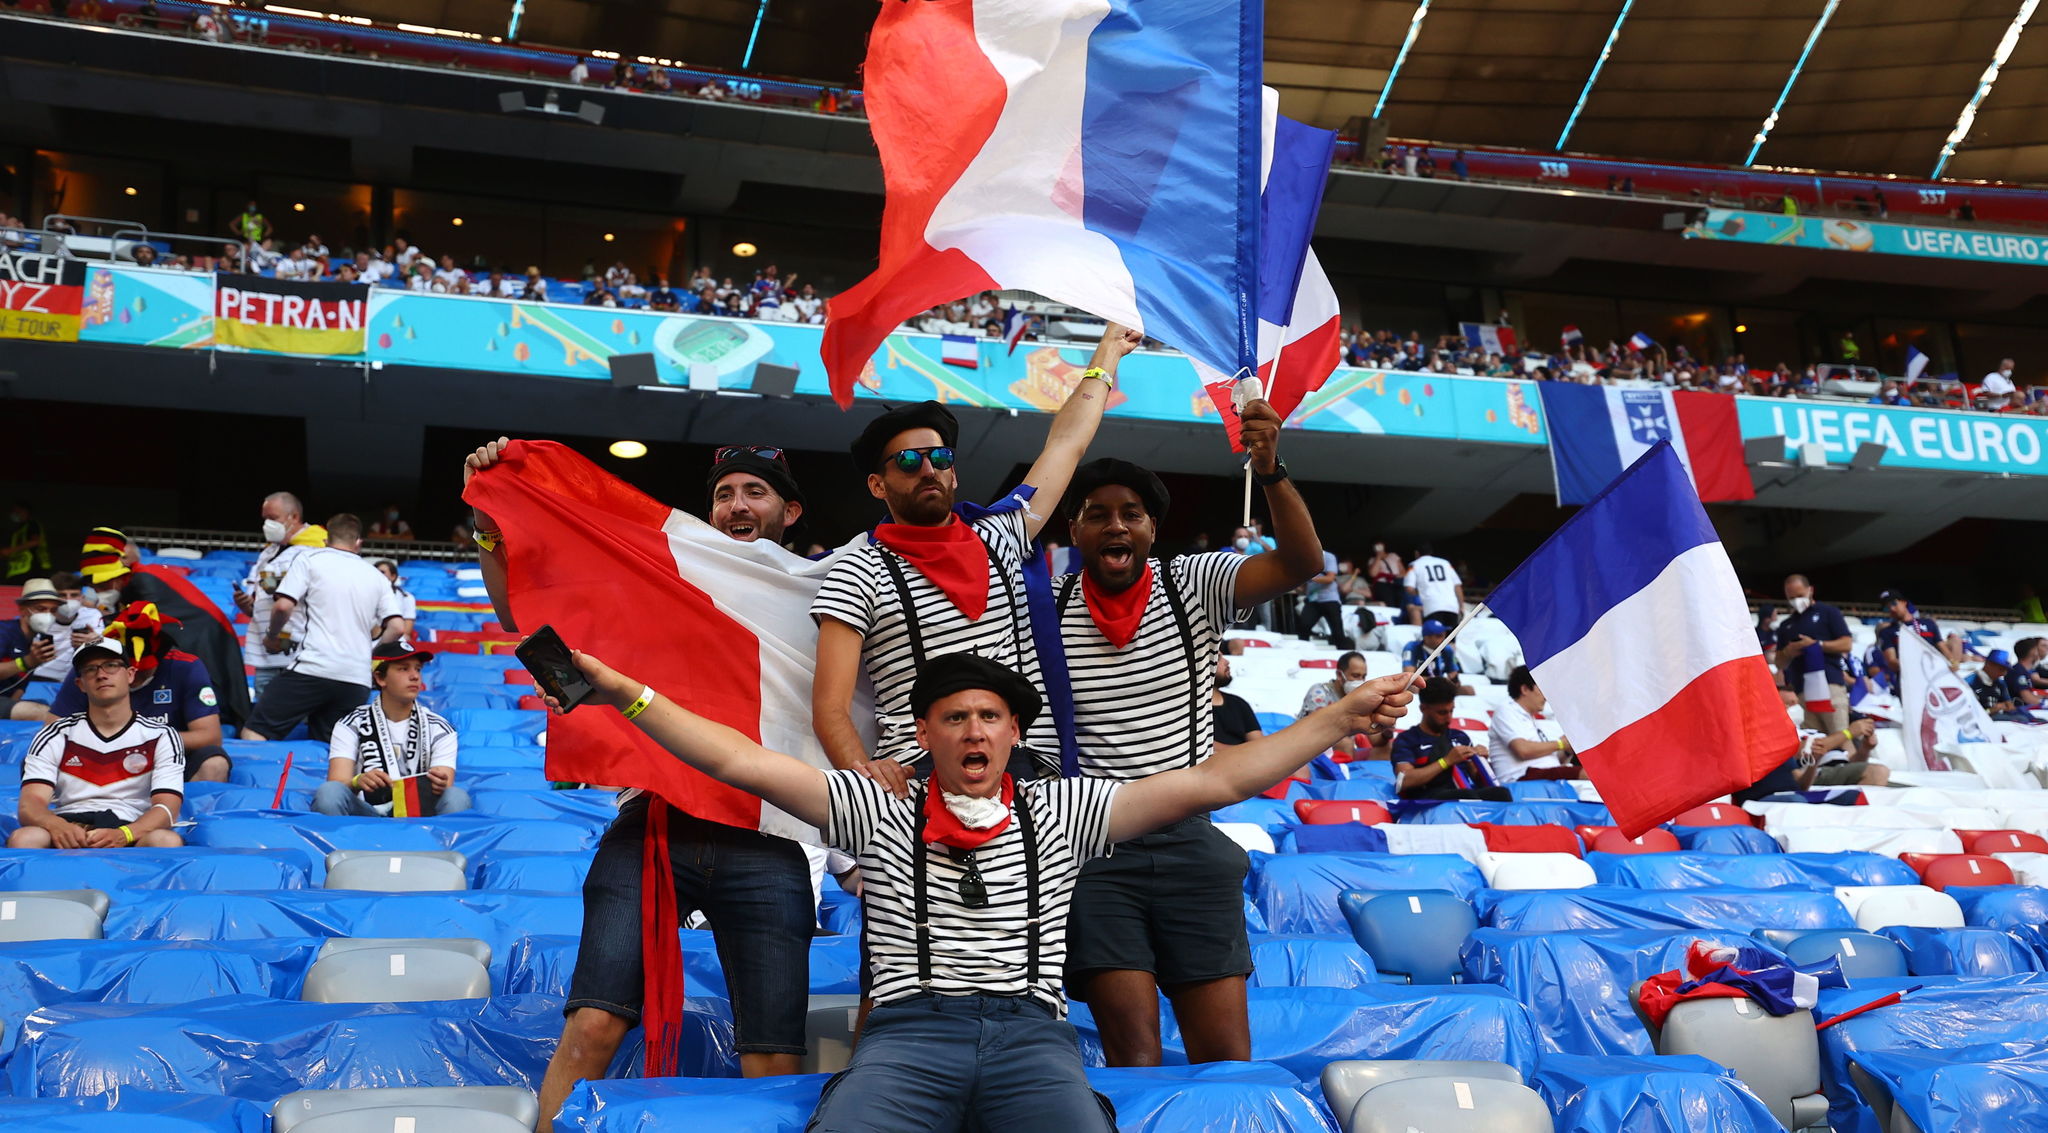 Supporters of France